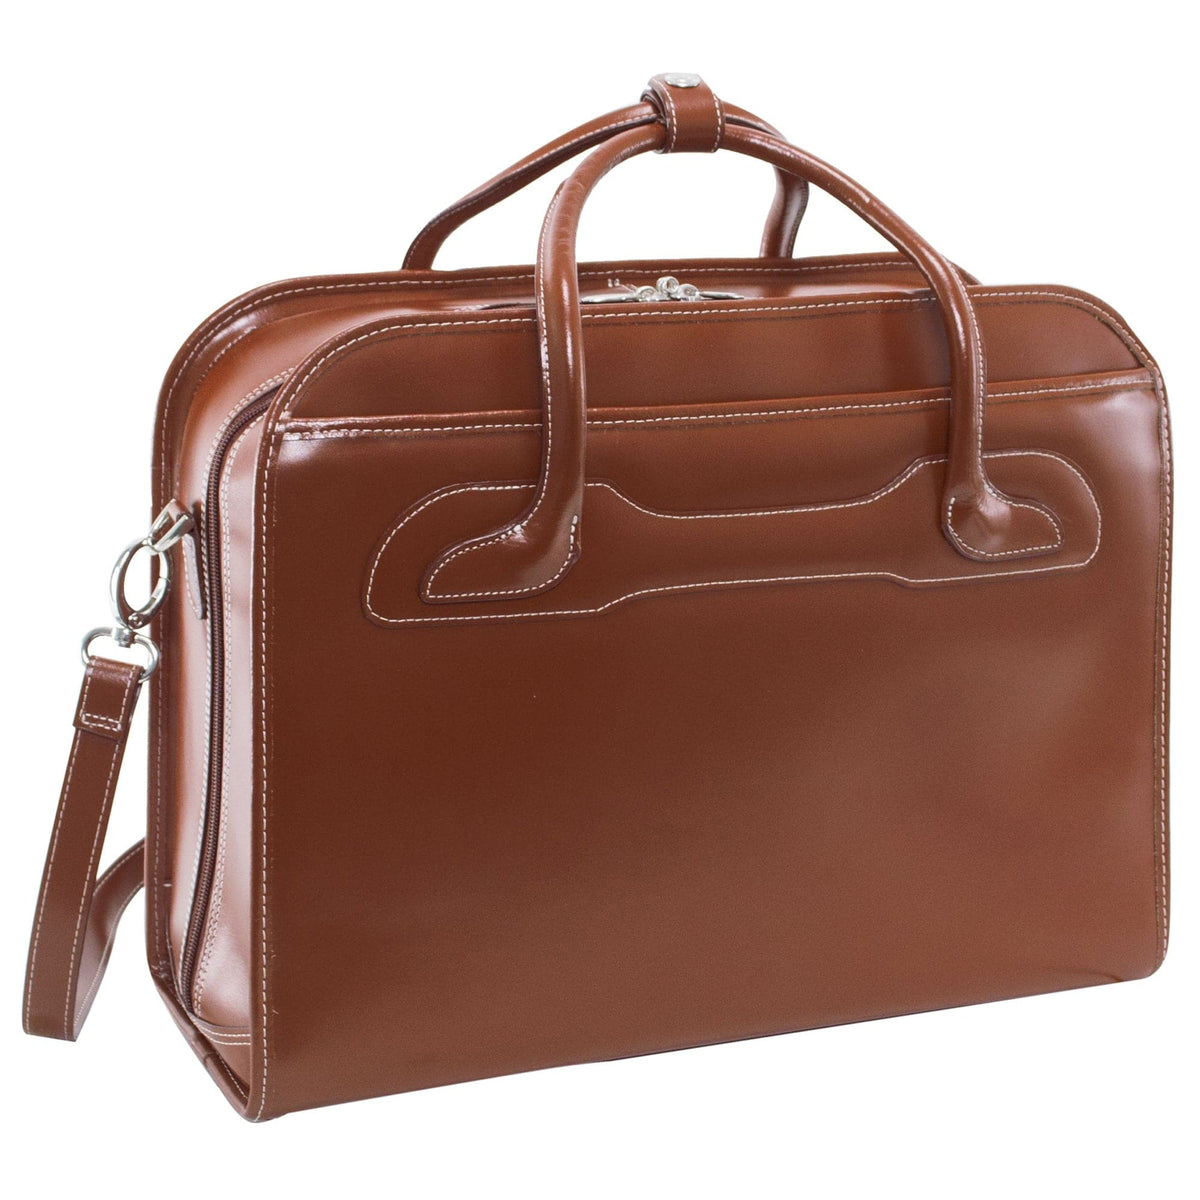 McKlein USA Willowbrook 17" Leather Patented Detachable-Wheeled Laptop Briefcase